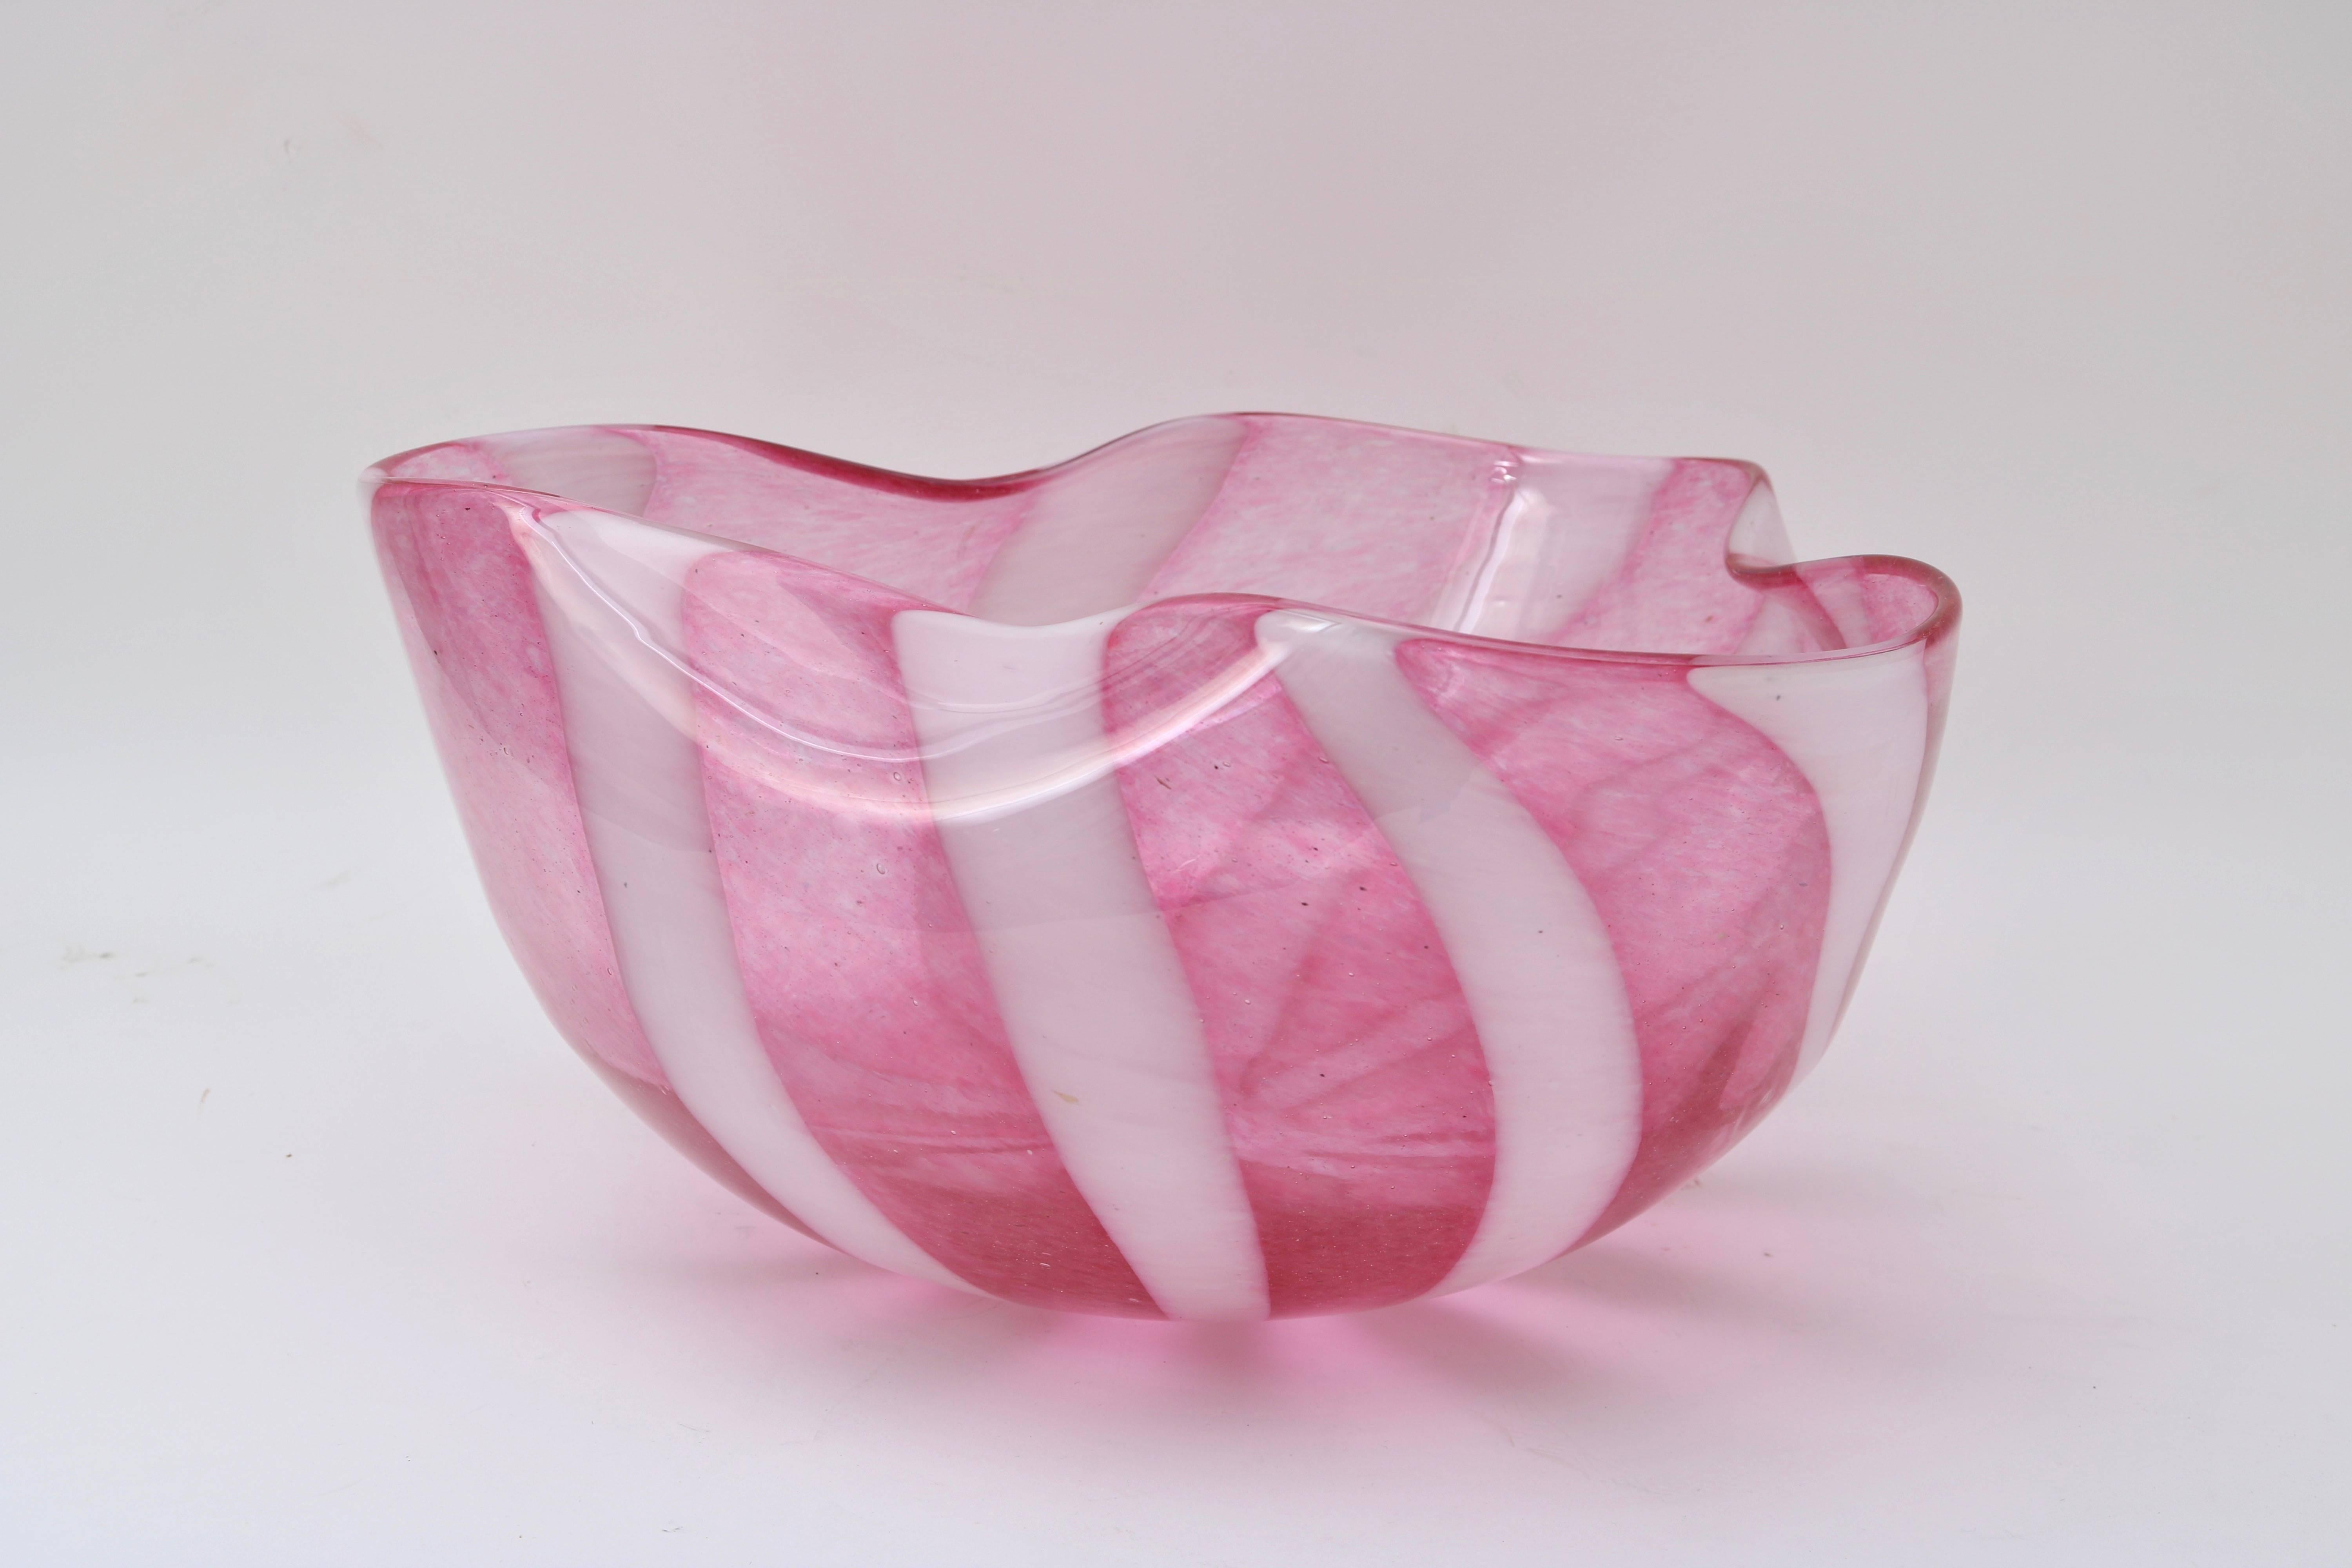 Italian  Murano Glass Bowl with Swirl Pattern in a Raspberry and White Coloration